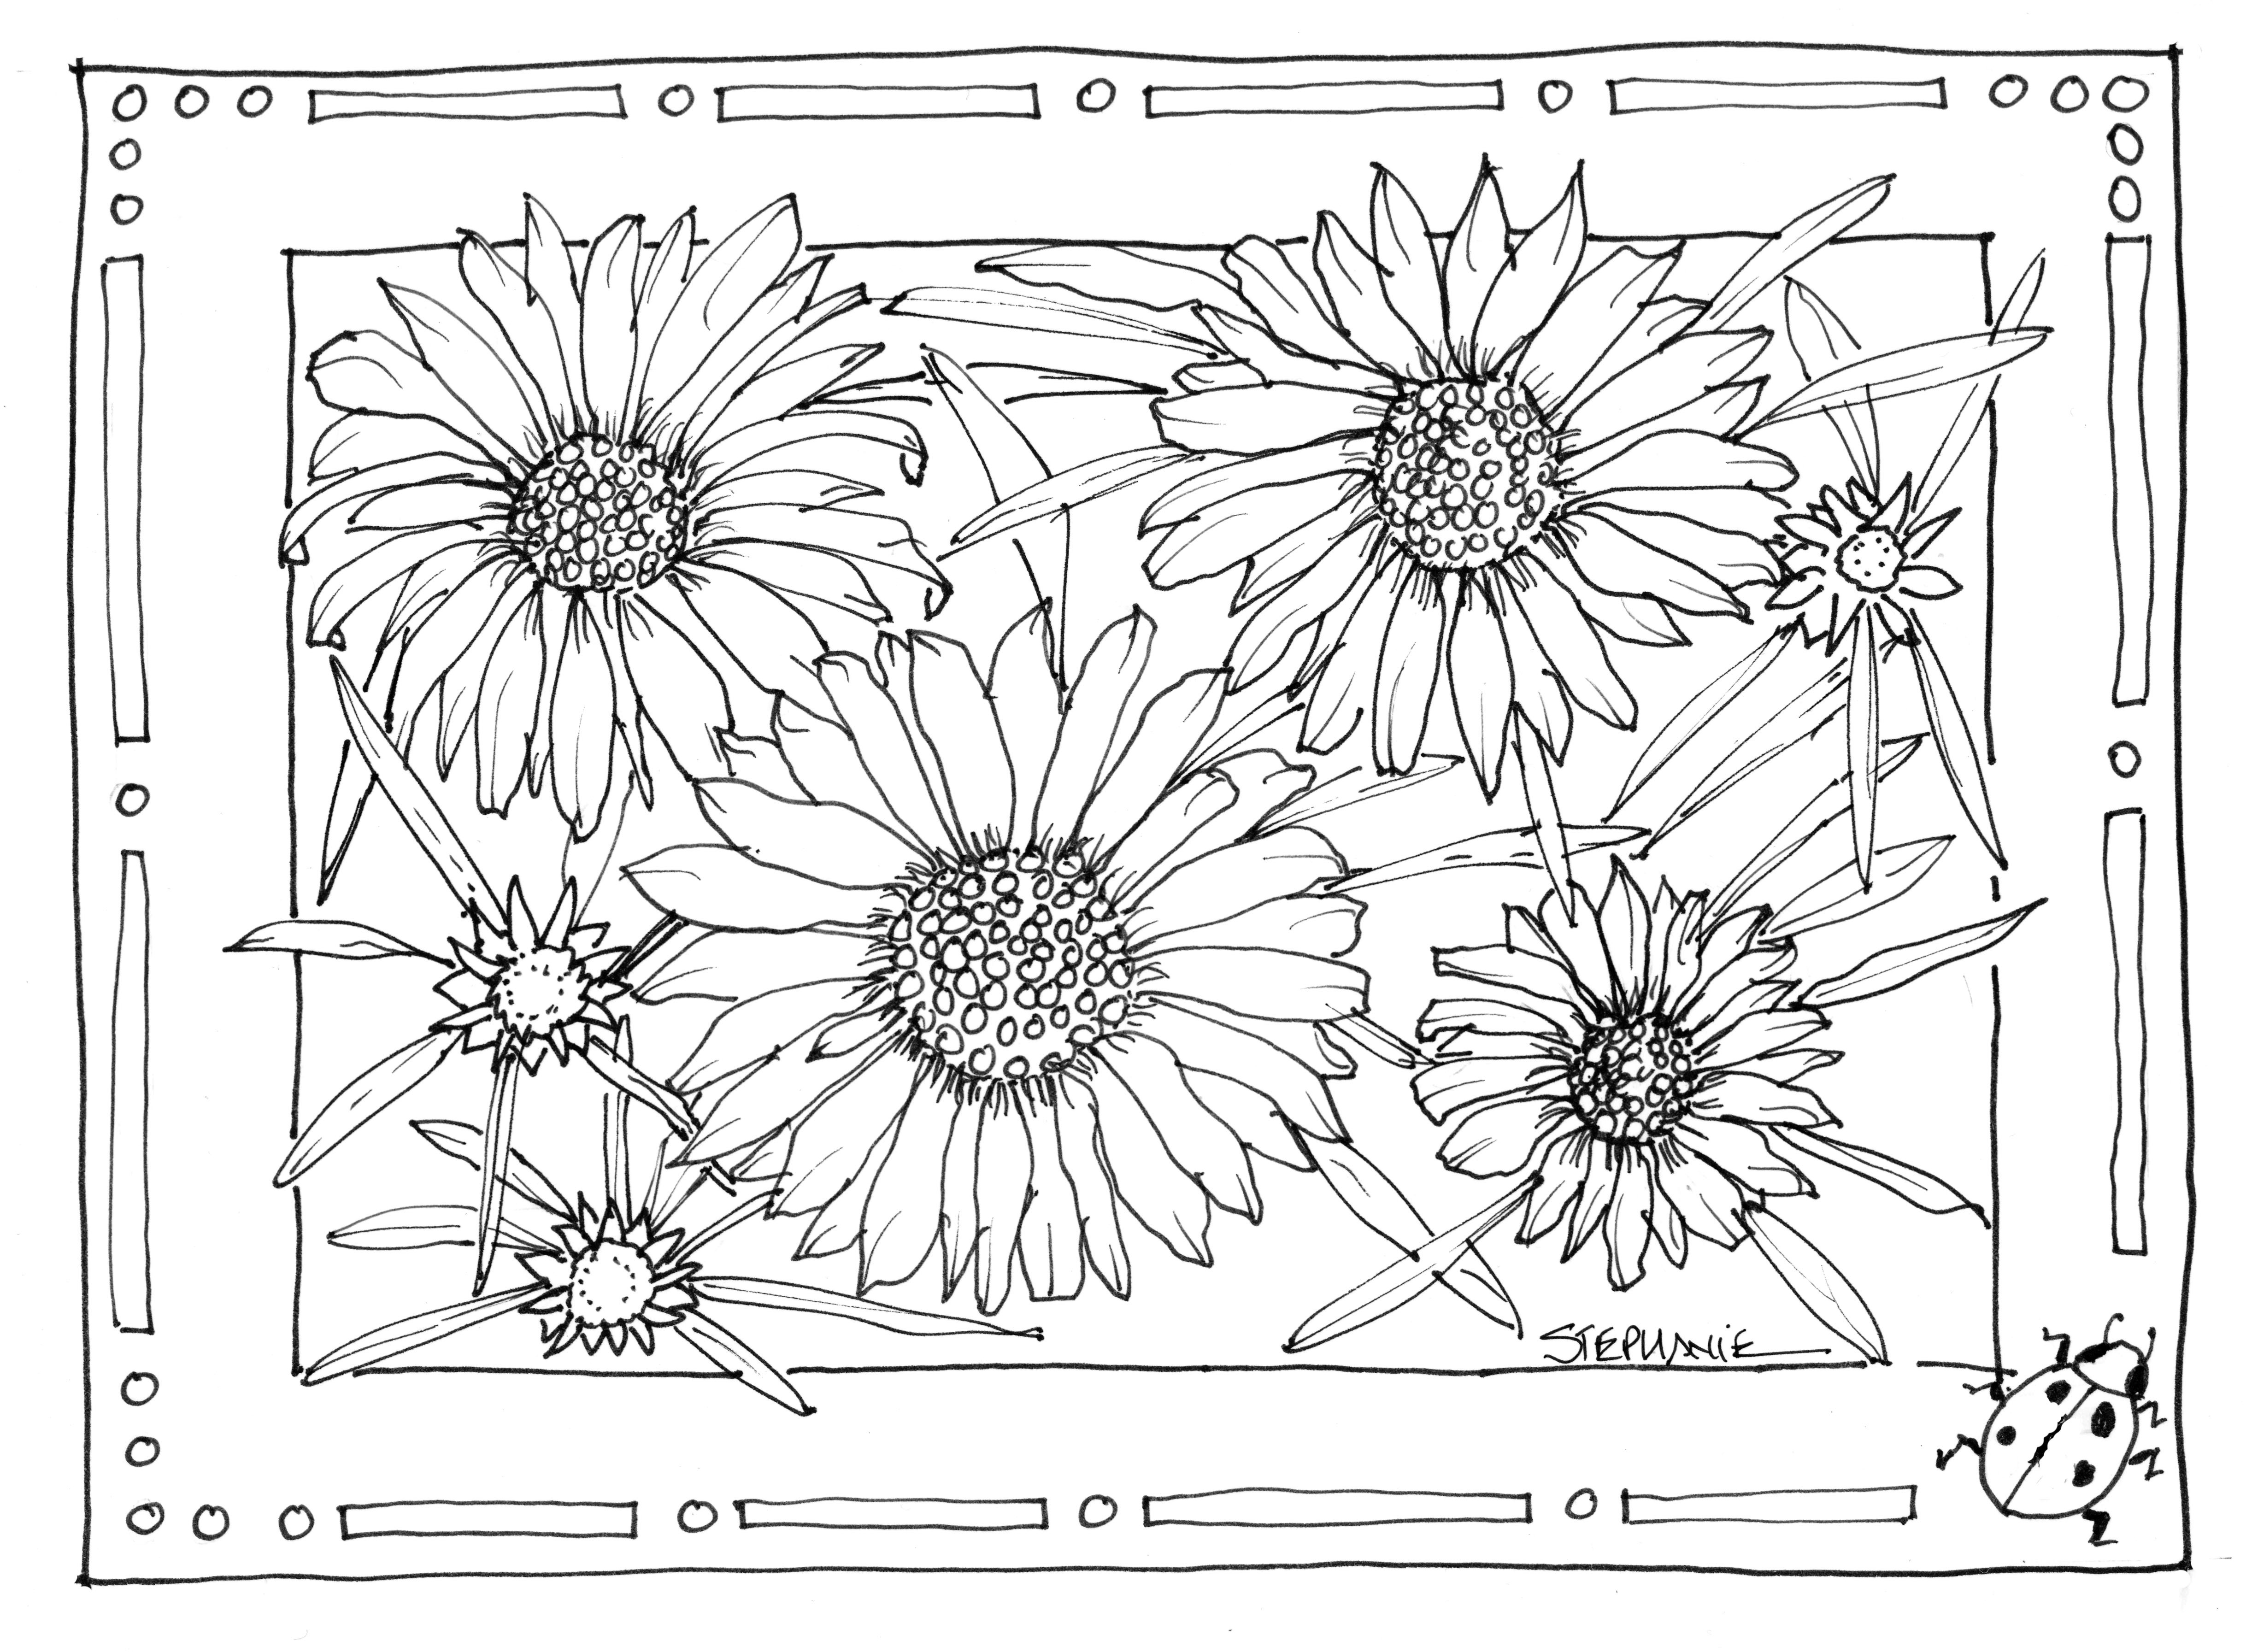 Hand Drawn Nature Coloring Pages | Drawing + Hand